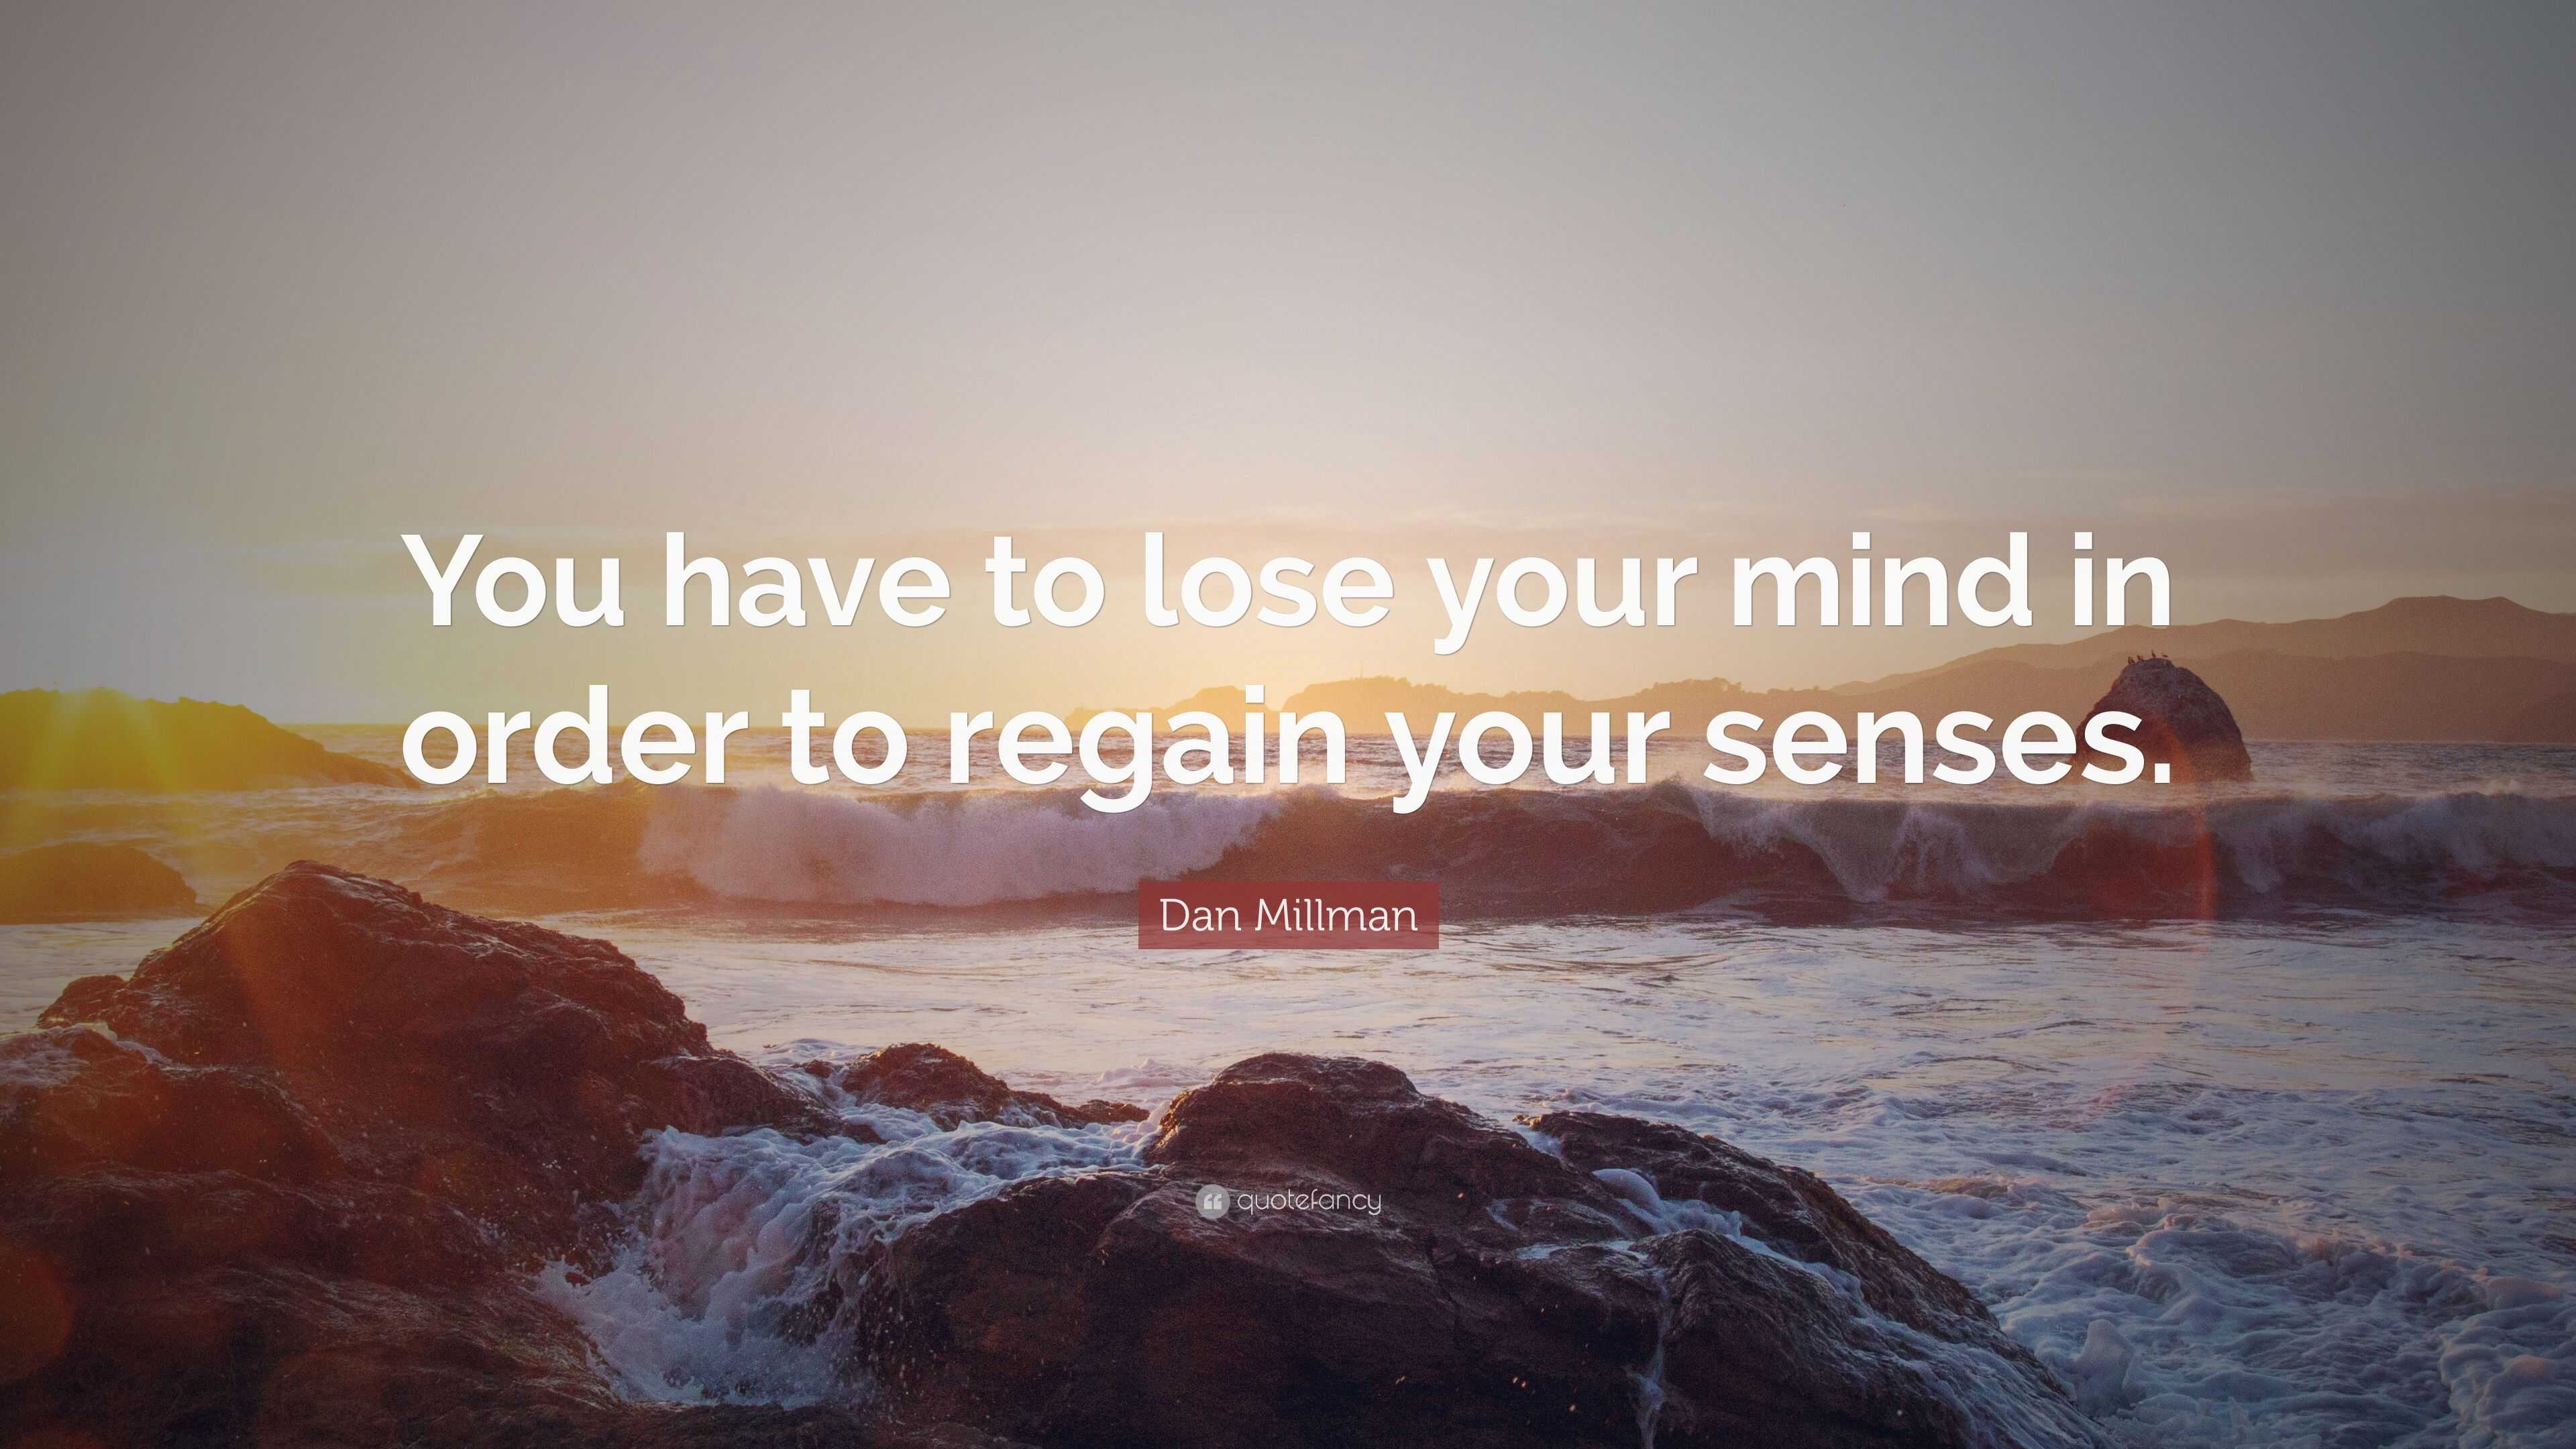 Dan Millman Quote You Have To Lose Your Mind In Order To Regain Your Senses